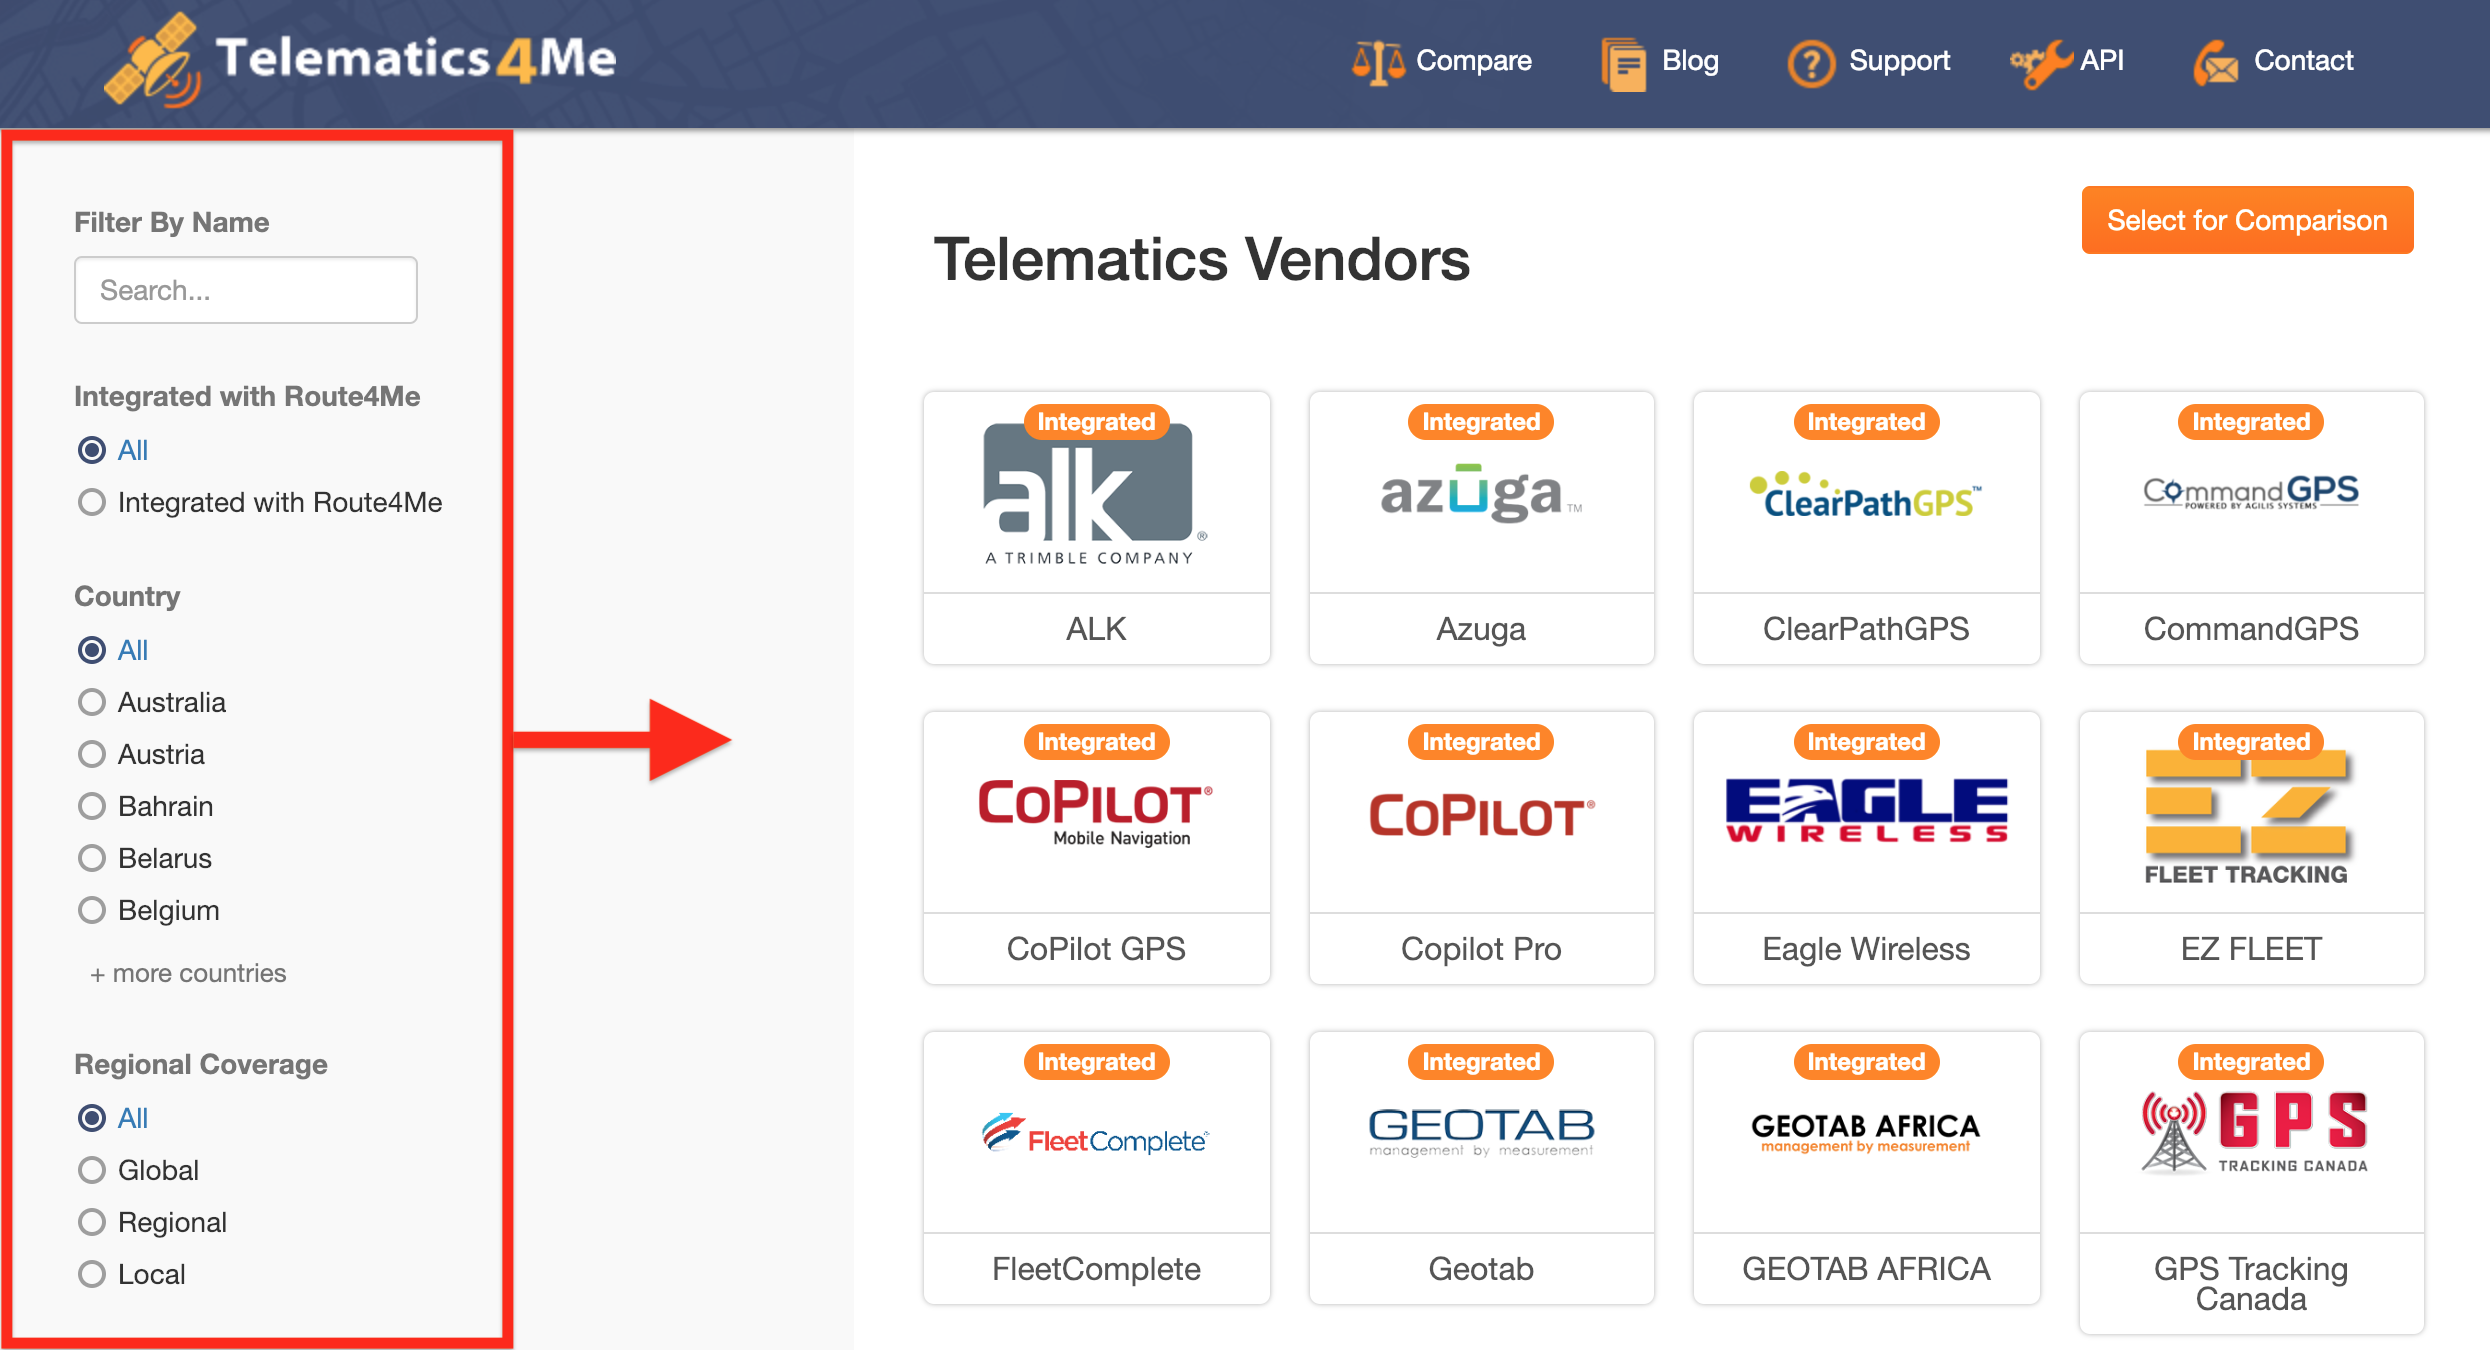 Route4Me telematics vendors filters in action